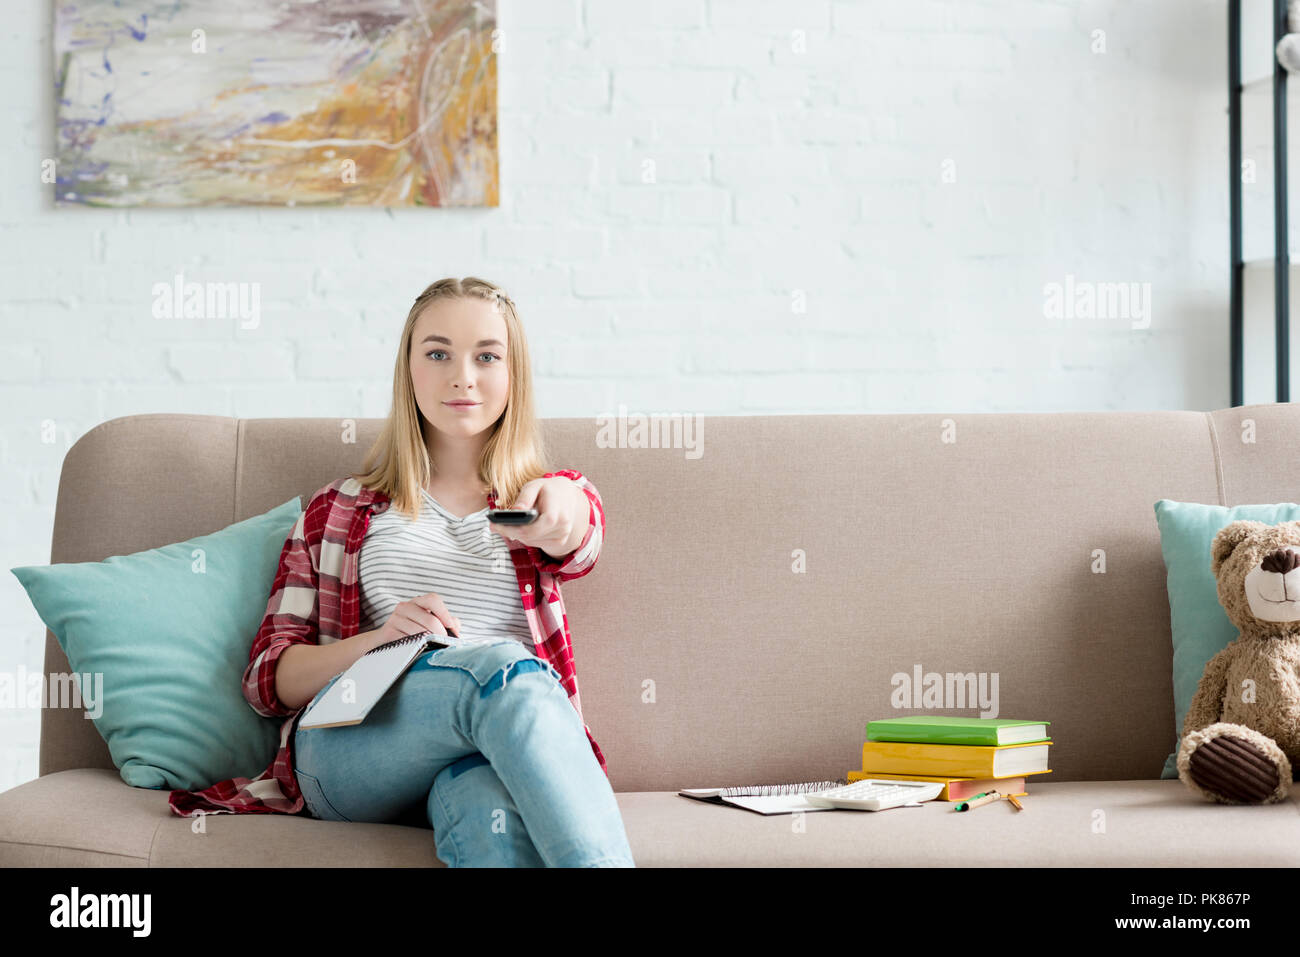 Smiling Teen Student Girl With Remote Control Watching Tv While Sitting